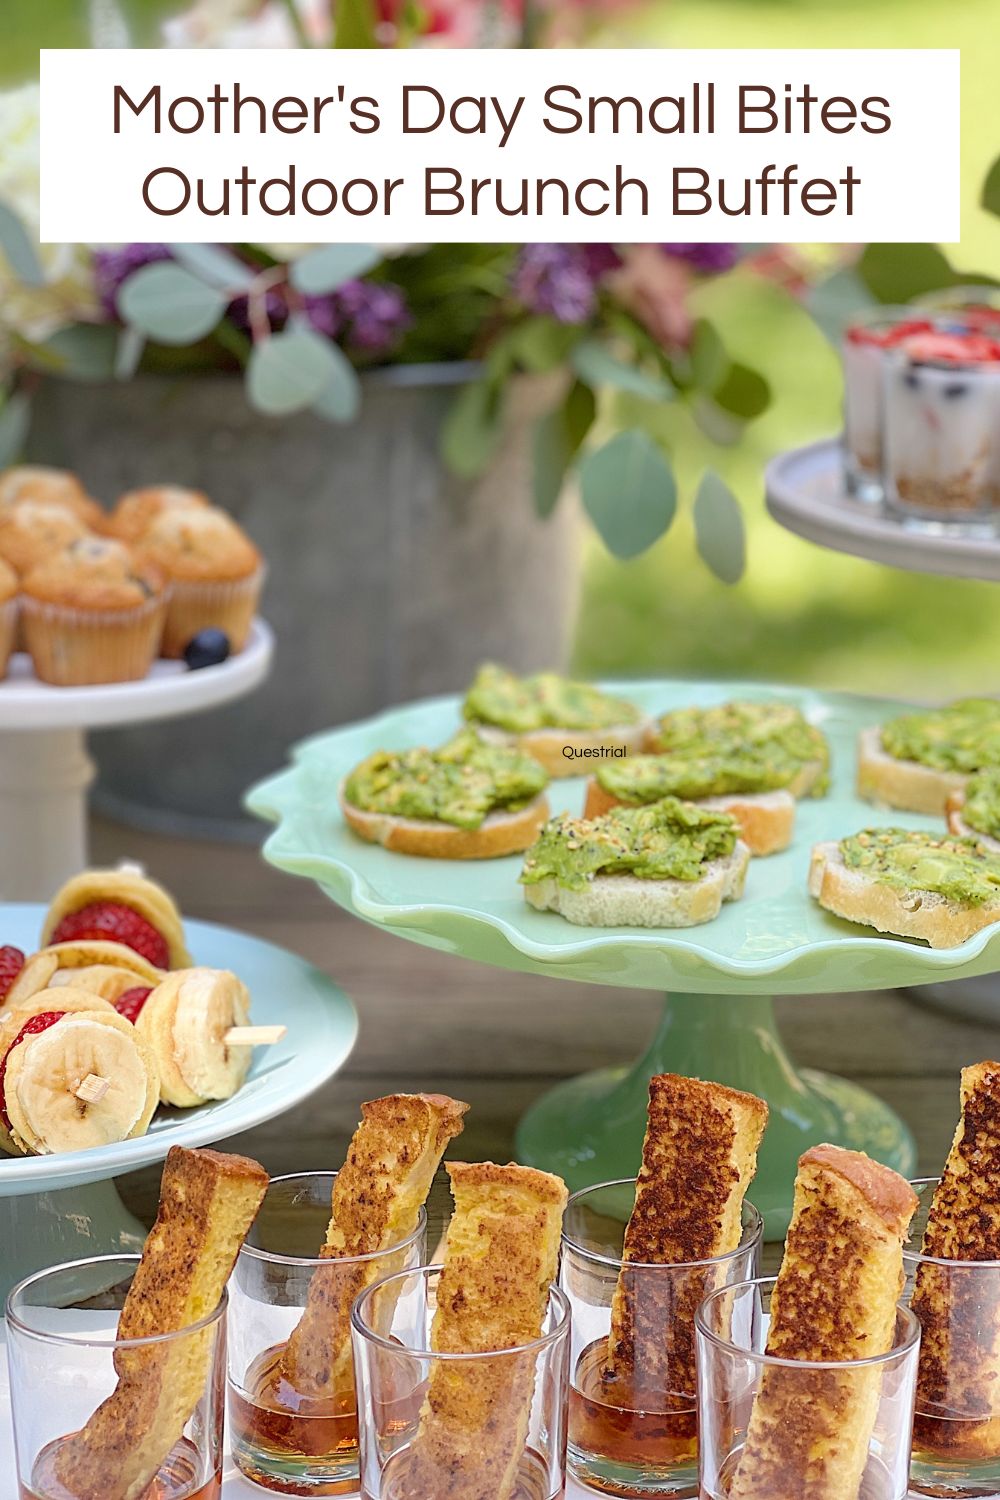 Mother's Day Brunch Buffet has always been a tradition. Today I am sharing some fun recipes for a small bites outdoor brunch buffet!